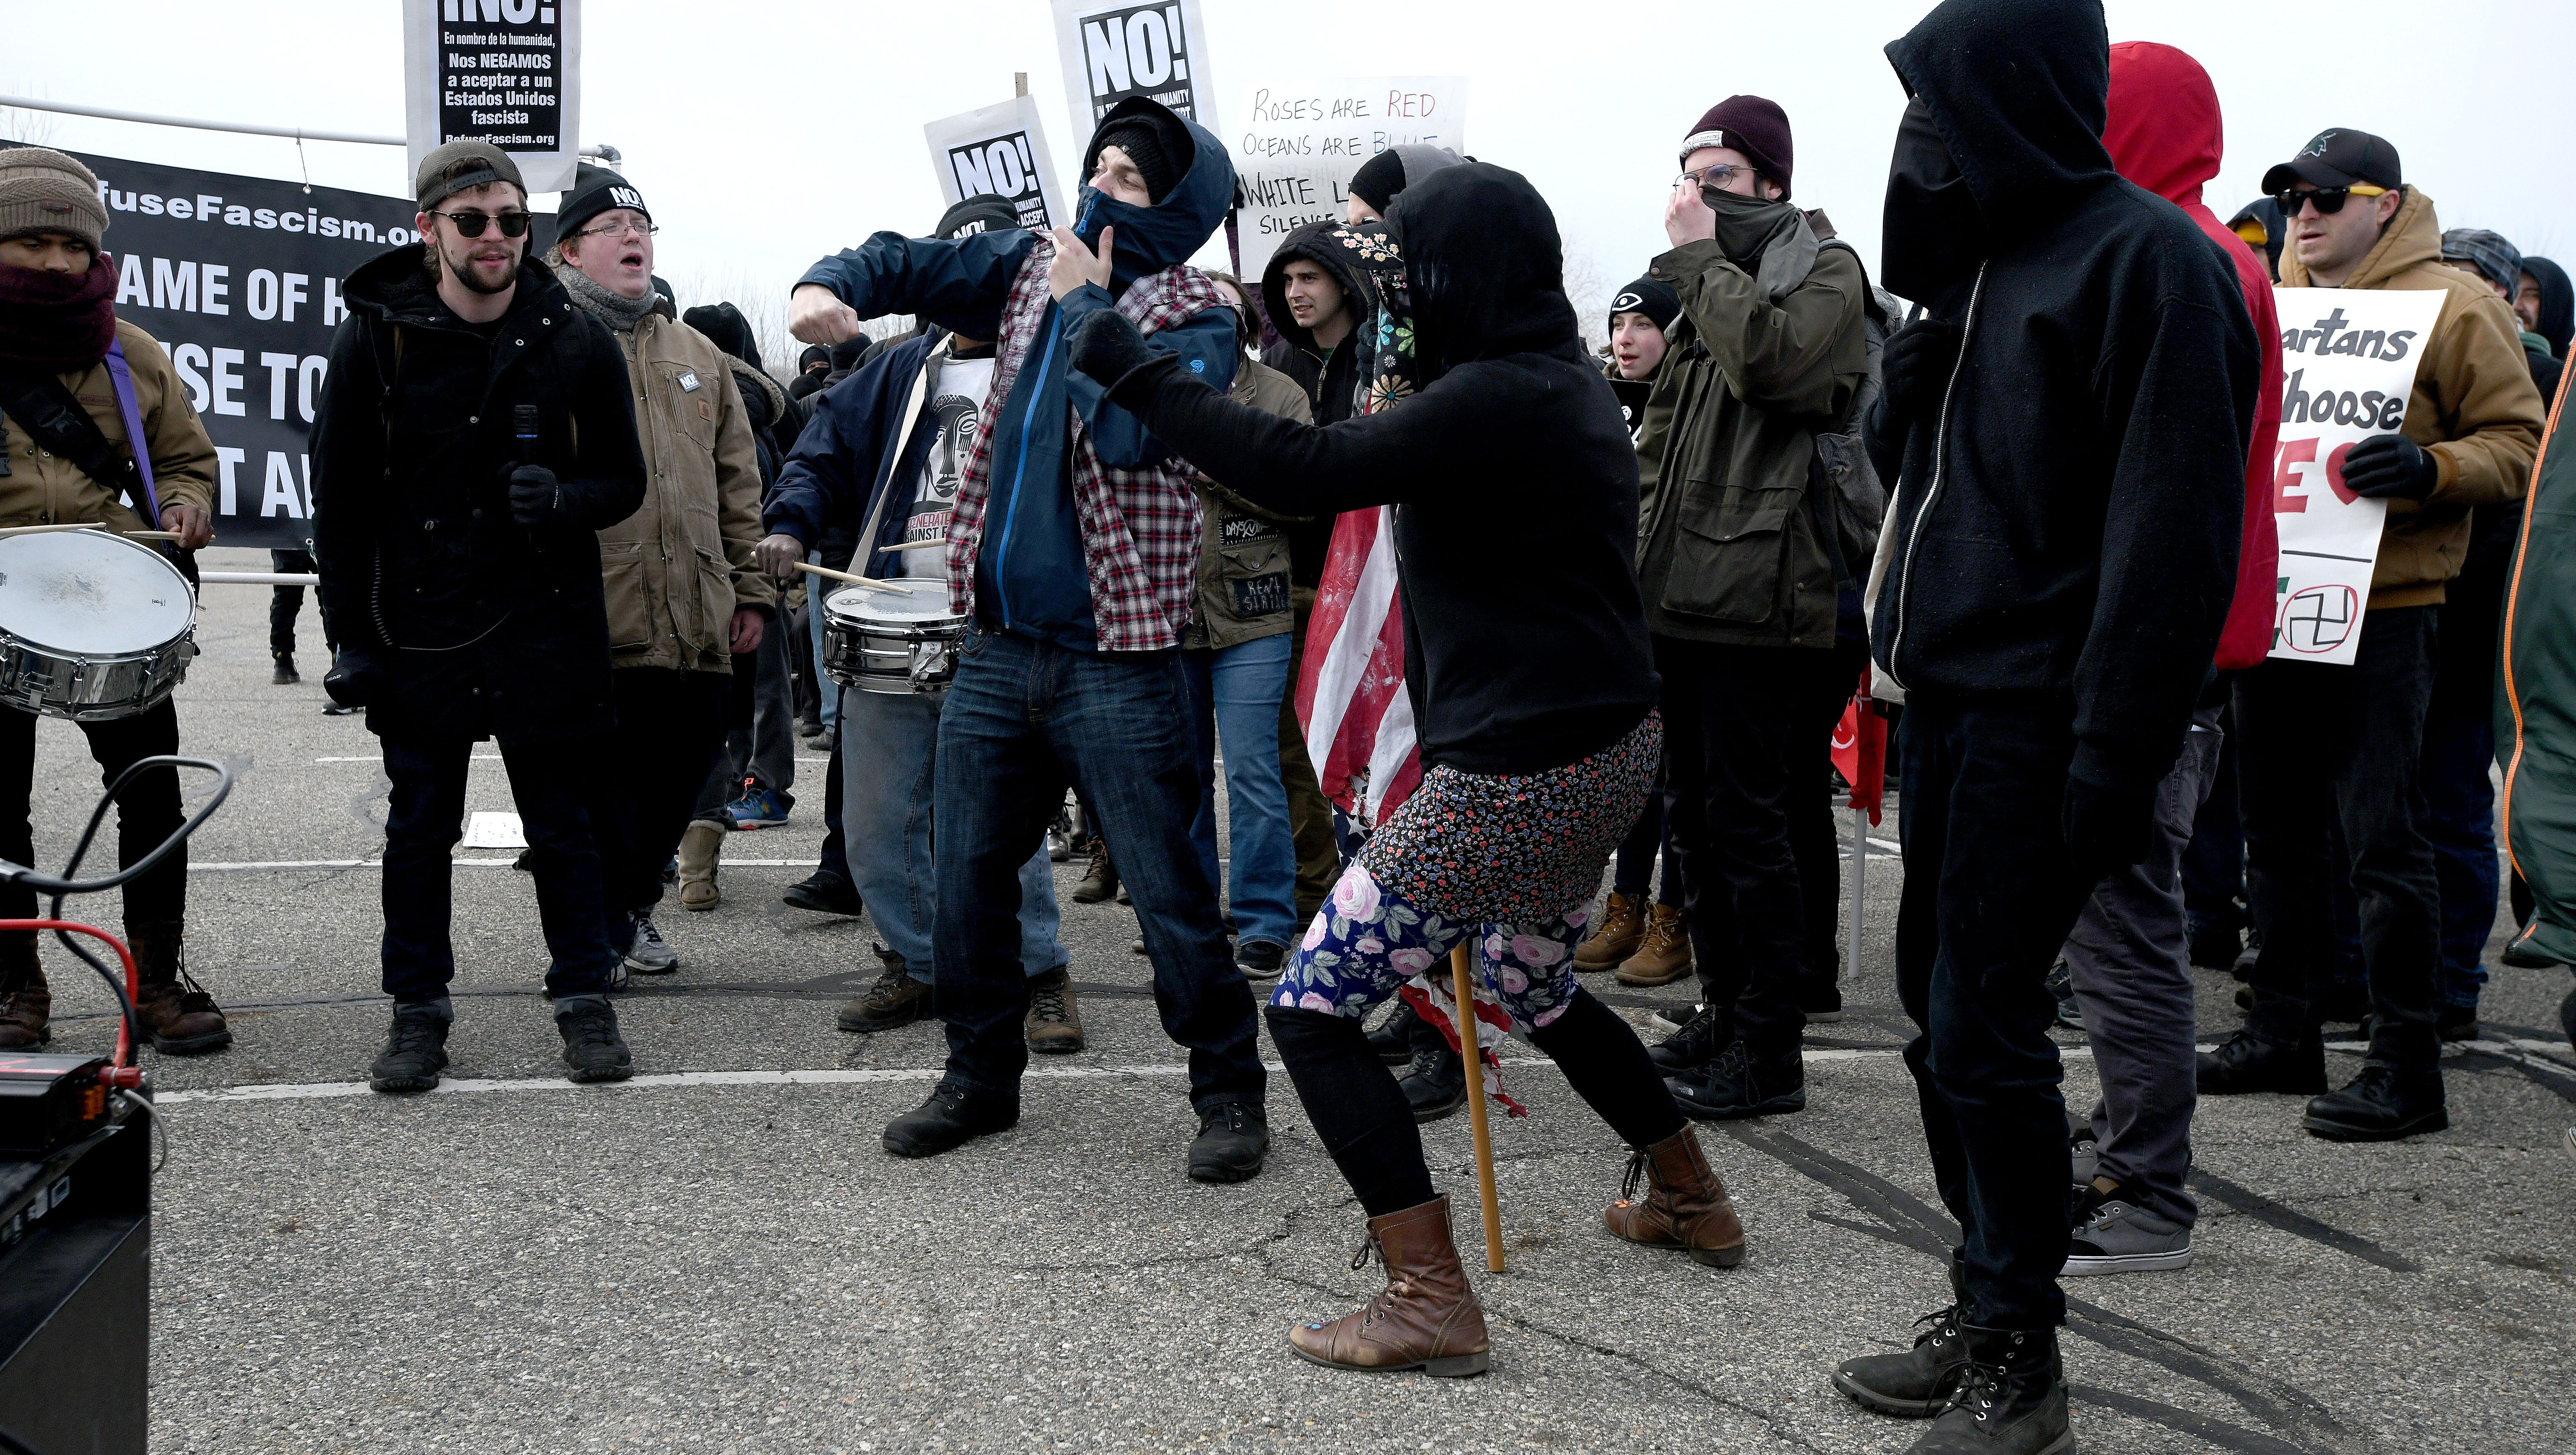 People demonstrate with a burned U.S. flag.